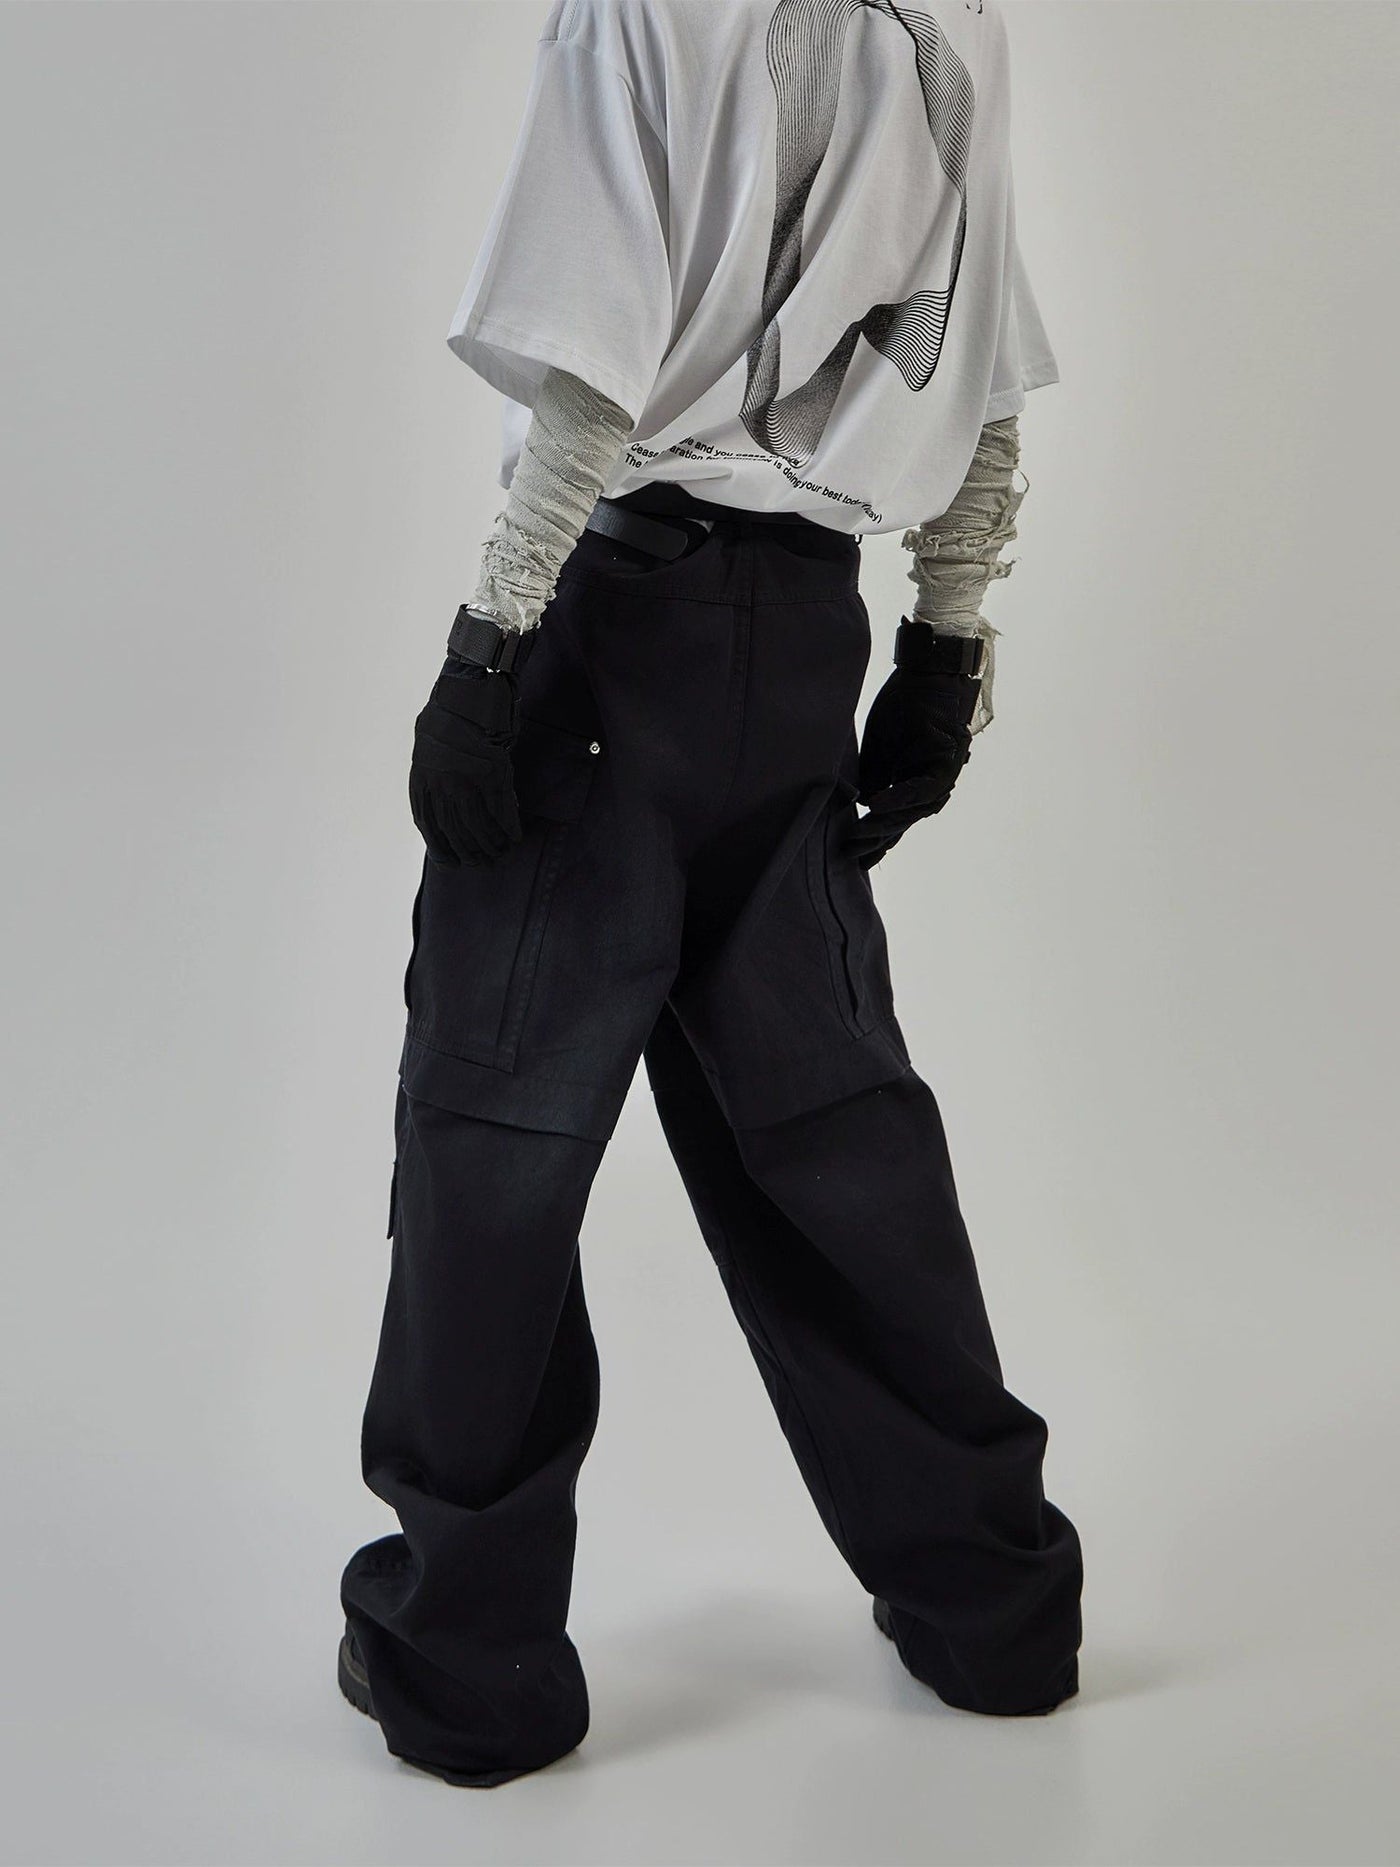 Layered Stitched Wide Cargo Pants Korean Street Fashion Pants By Ash Dark Shop Online at OH Vault